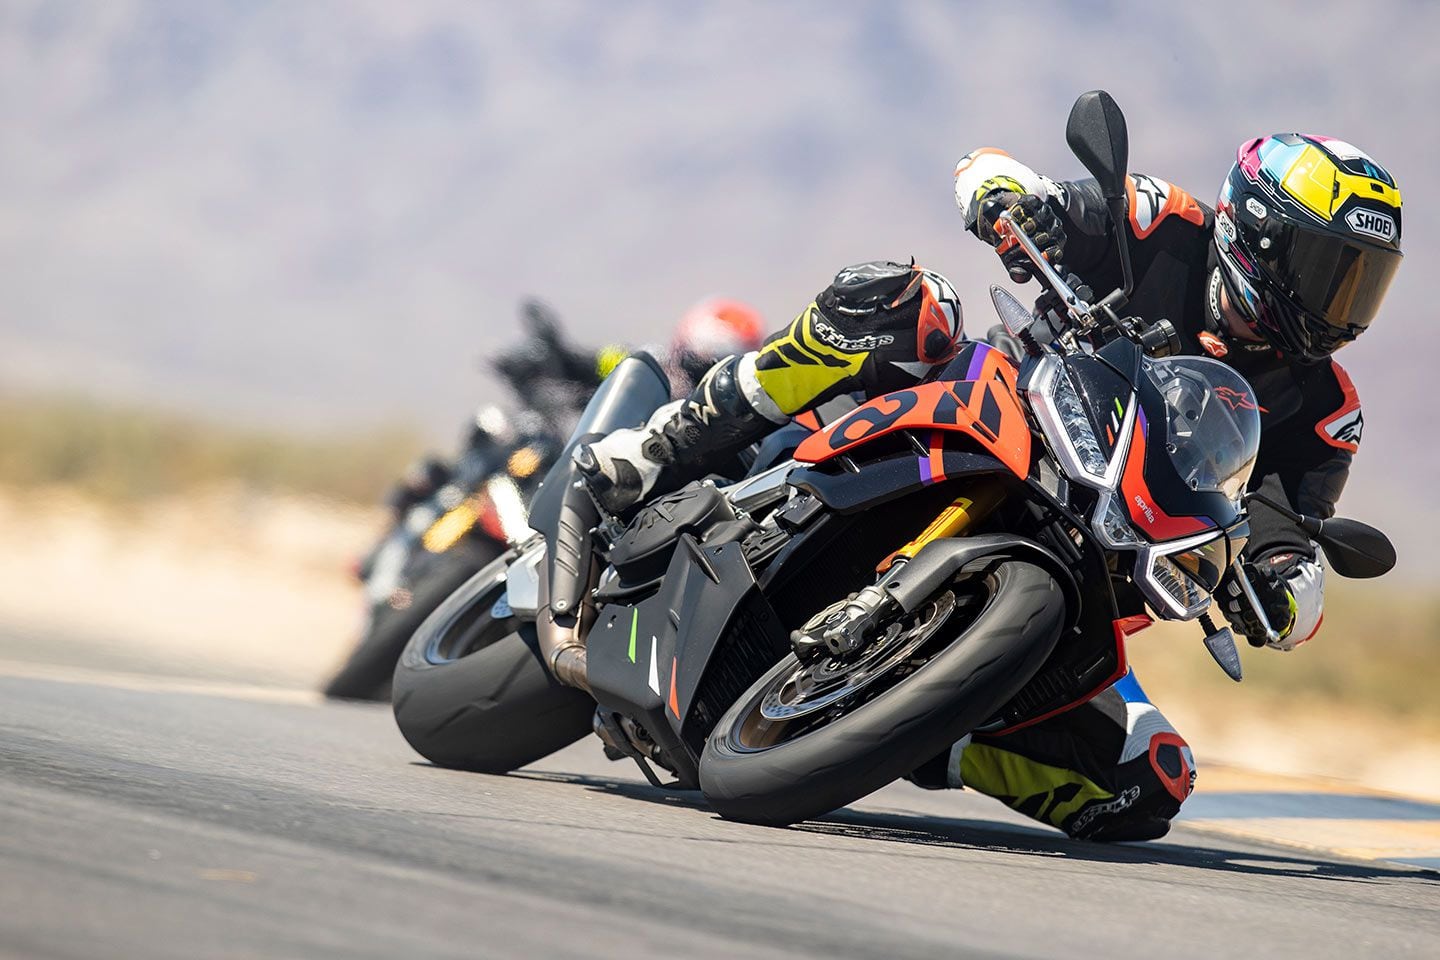 Pirelli’s new Diablo Supercorsa SP - V4 provided amazing performance over two days of testing, both on the track at a 110-degree day at Chuckwalla Valley Raceway and then on the street two days later.